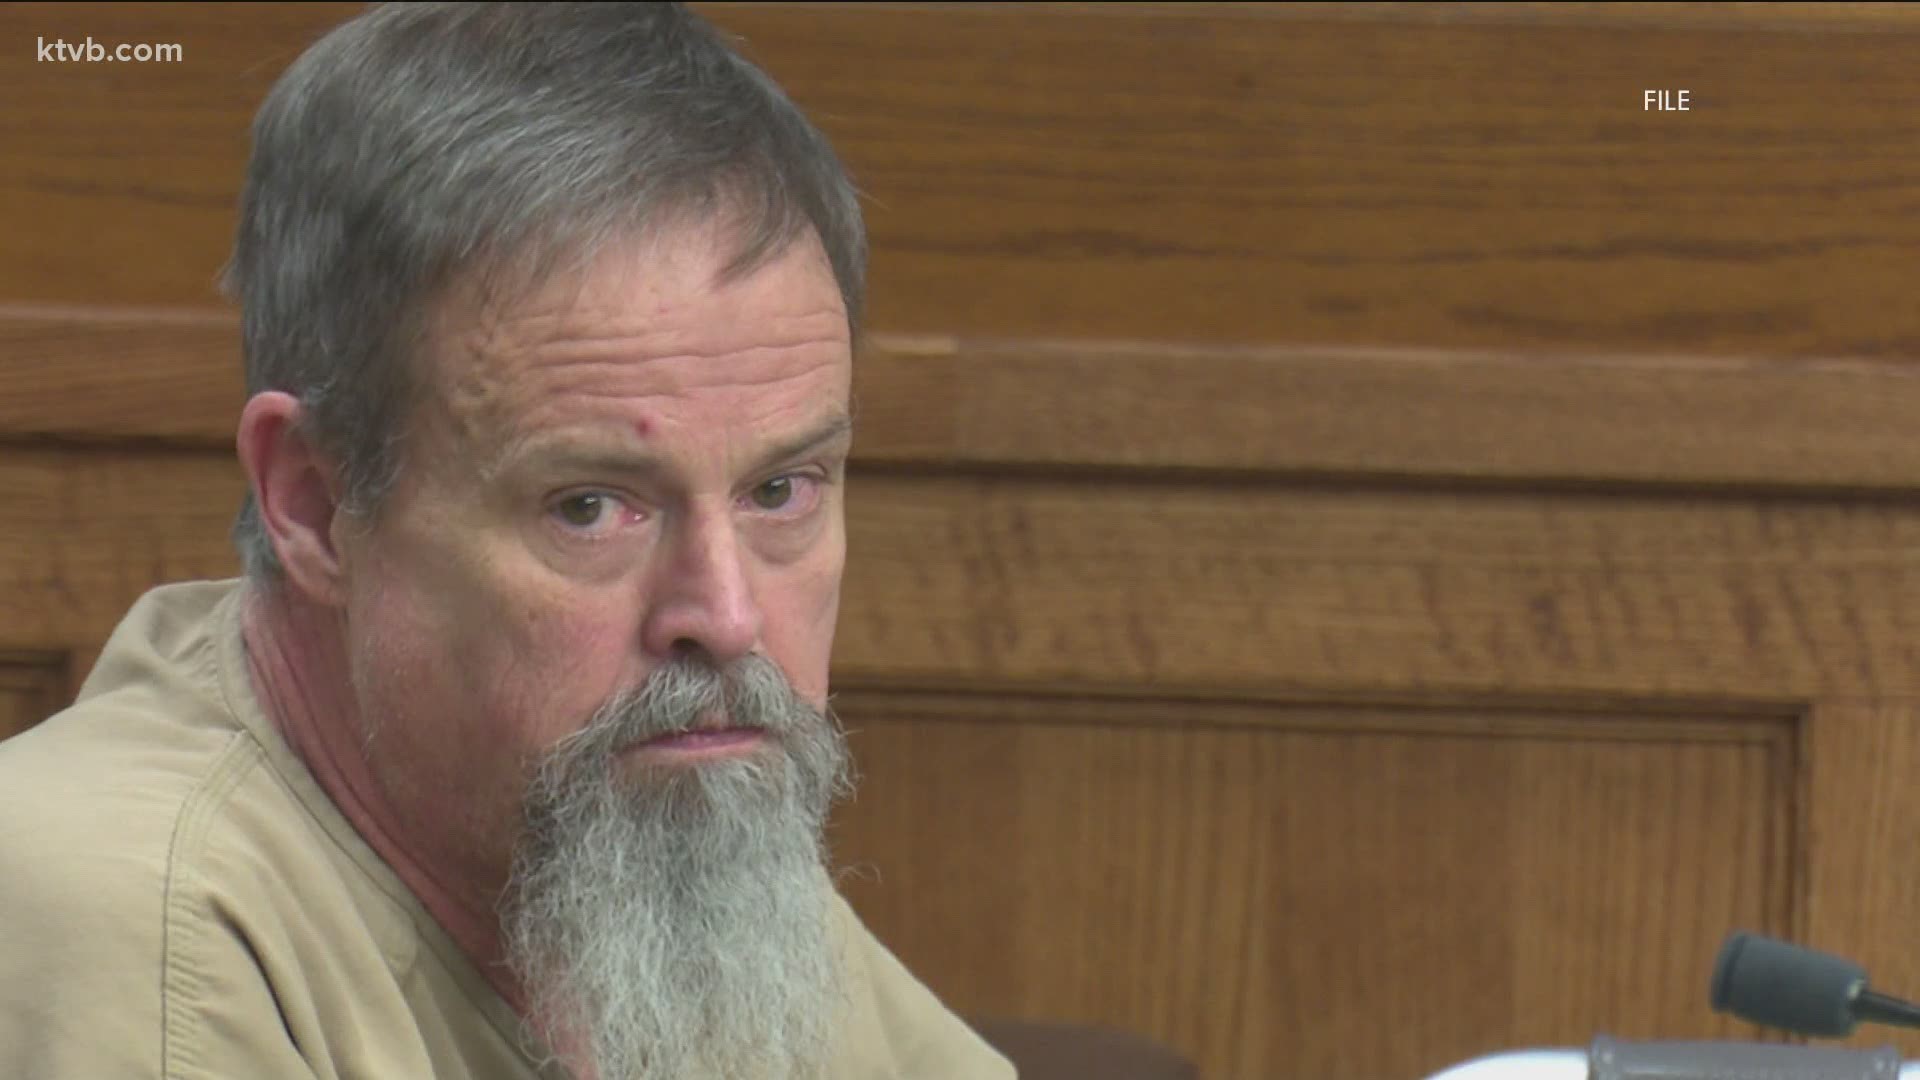 Brian Dripps admitted to killing and raping Dodge in 1996.